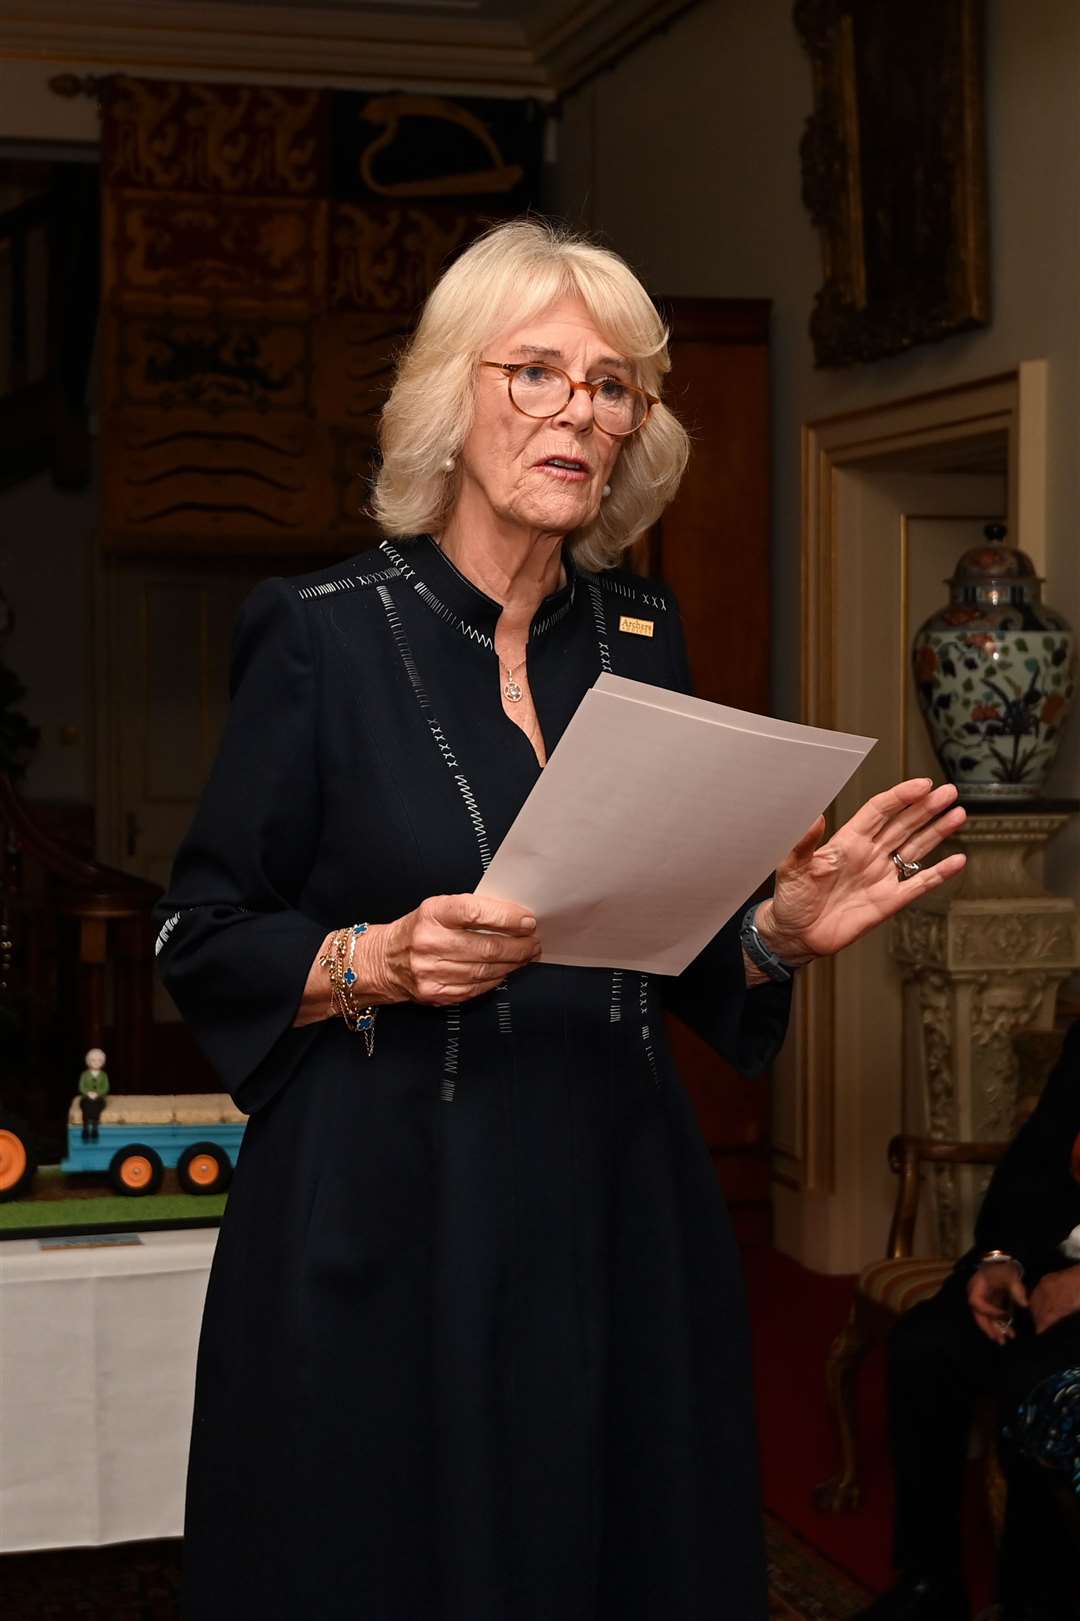 Camilla speaking at a reception to celebrate the 70th anniversary of The Archers in 2021 (Kate Green/PA)